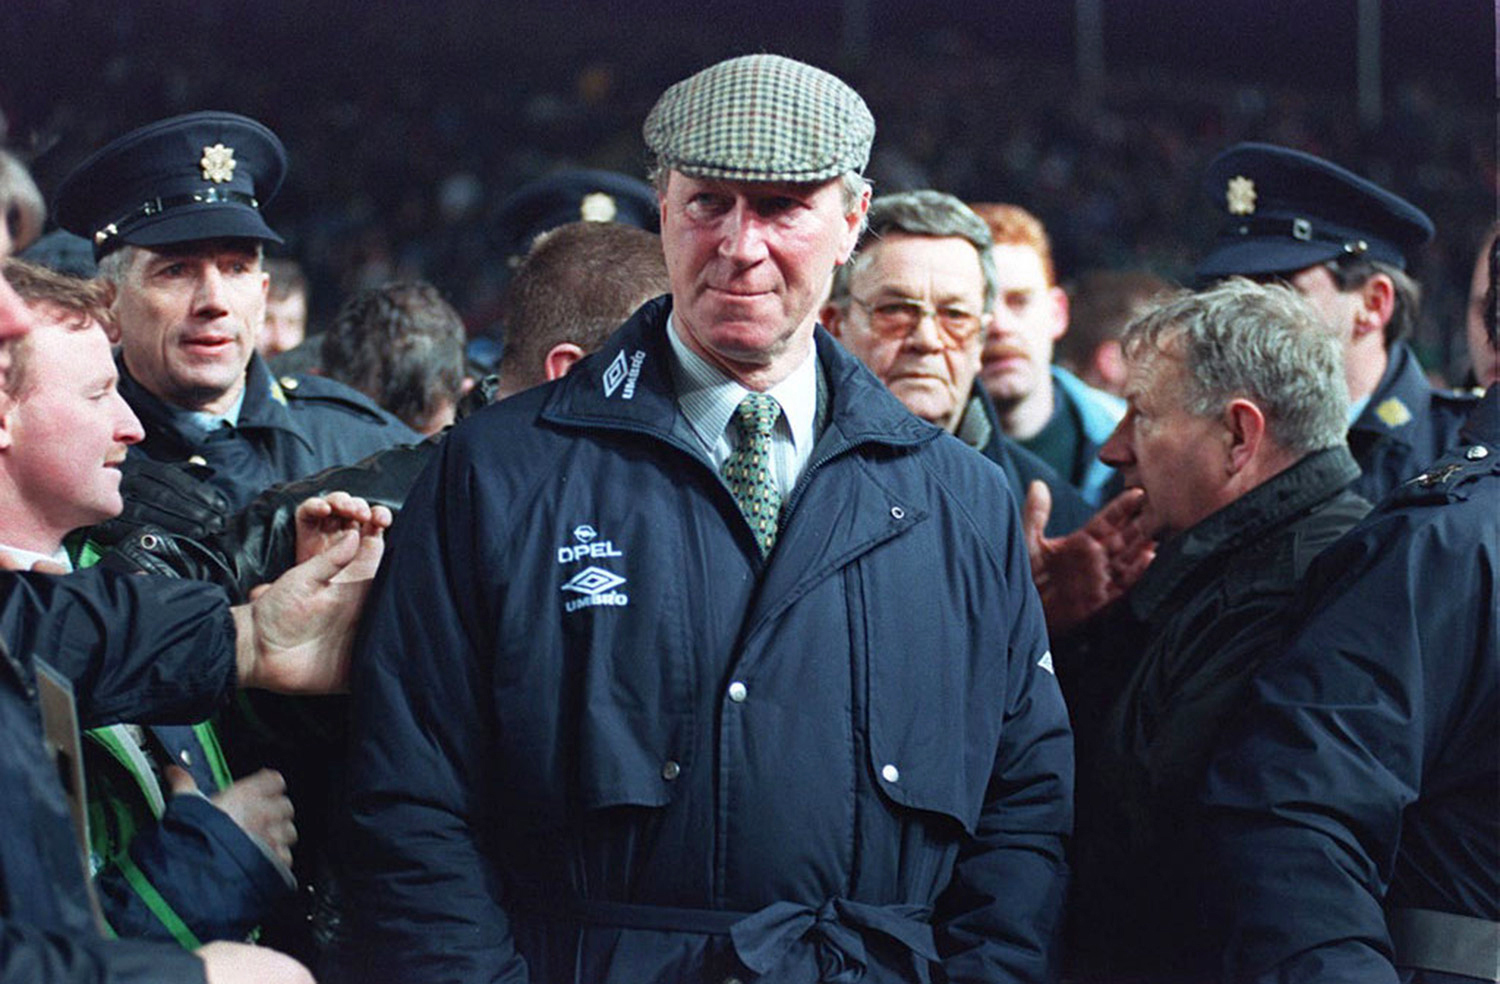 FILE - Feb. 15, 1995 file photo of Ireland soccer team manager Jack Charlton. Jack Charlton, who won the World Cup with England in 1966, has died it was announced on Saturday July 11, 2020. He was 85. Photo: AP